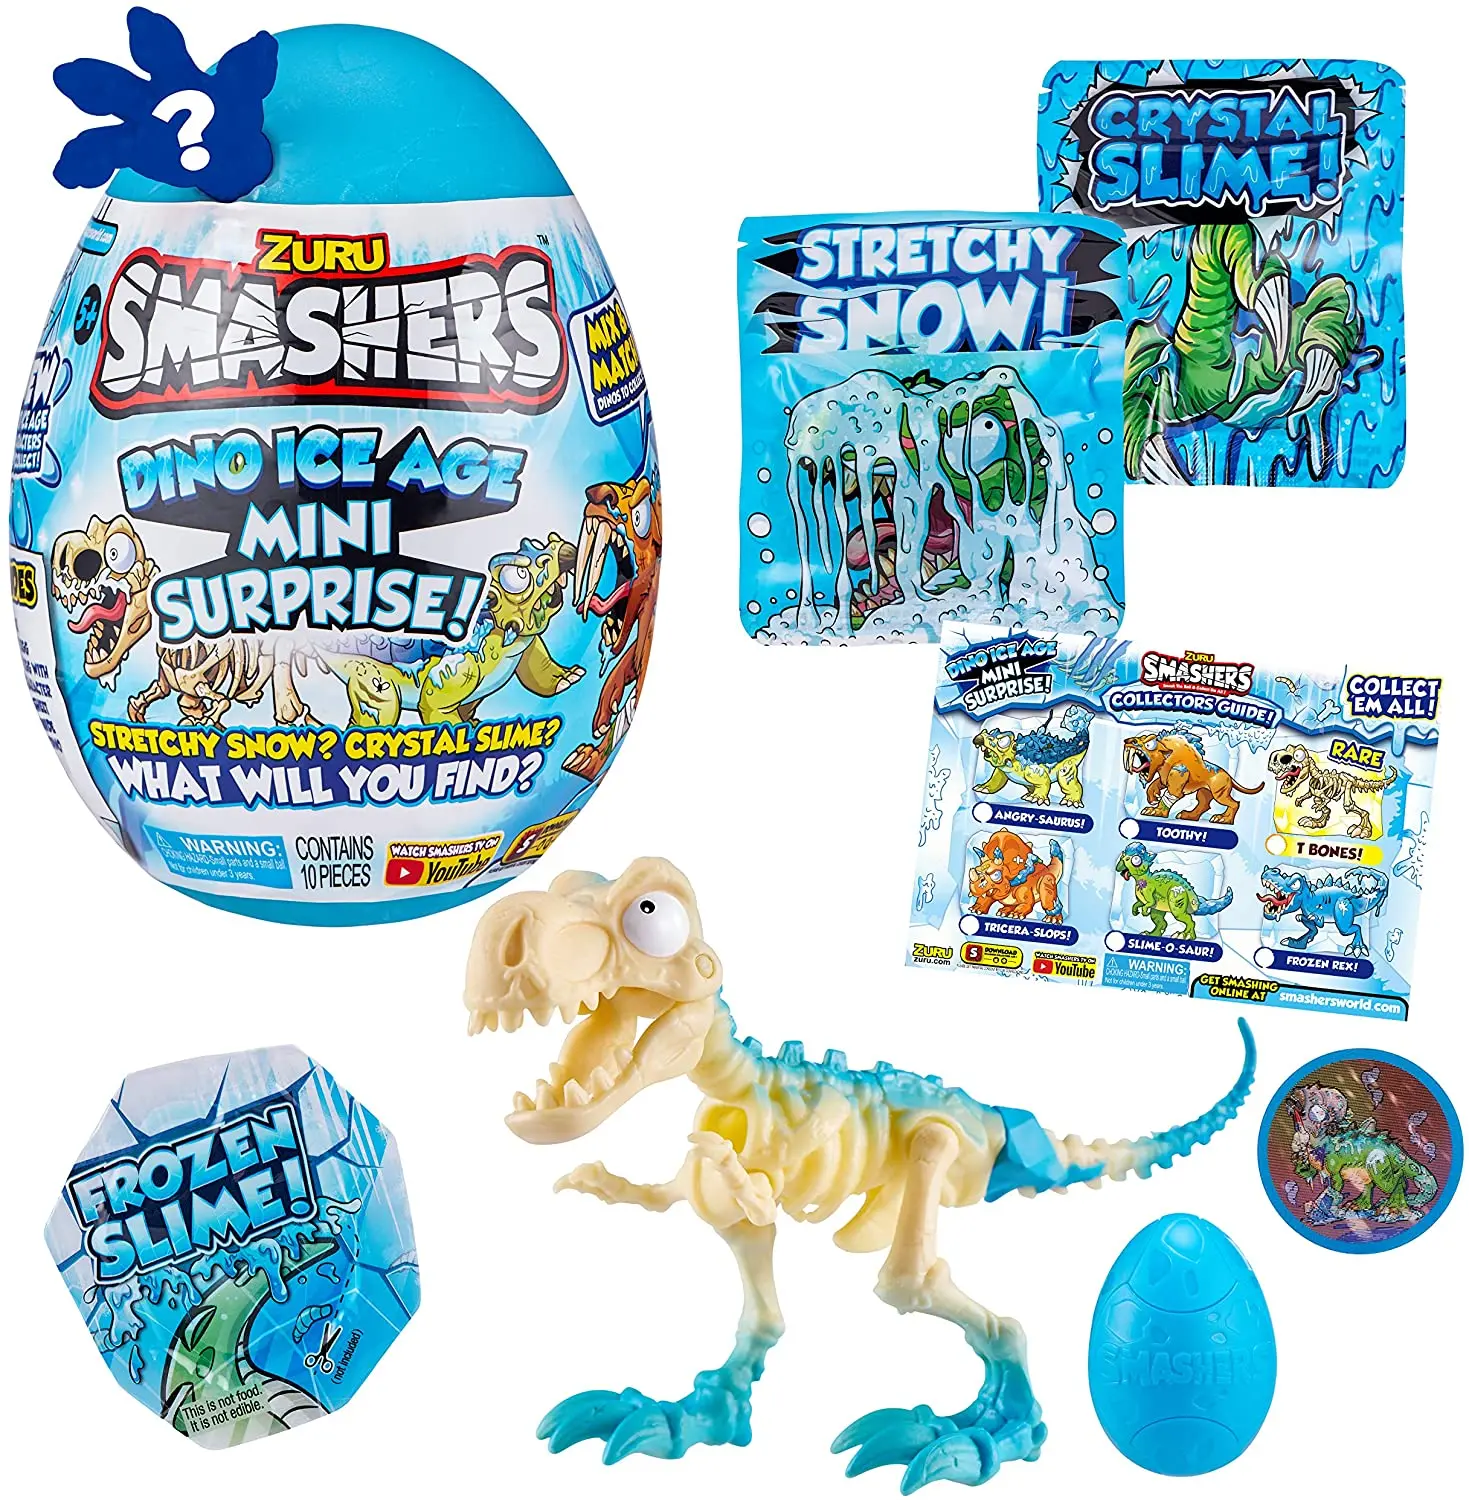 Zuru Smashers Dino Ice Age Surprise Egg with Over 25 Surprises By Raptor Pterodactyl Mammoth Rainbow Unicorn Doll Gift Toy Boys